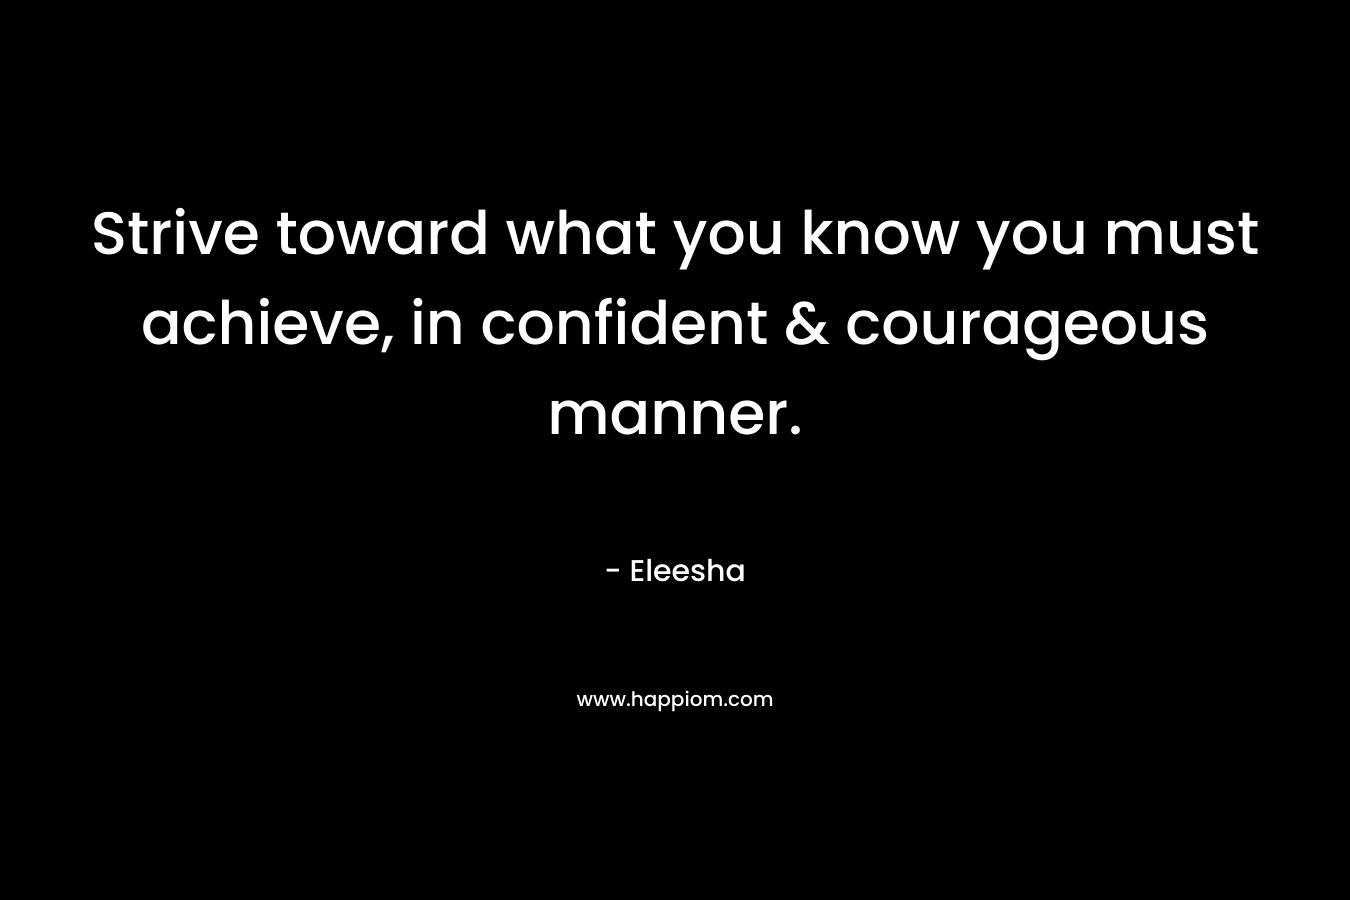 Strive toward what you know you must achieve, in confident & courageous manner.